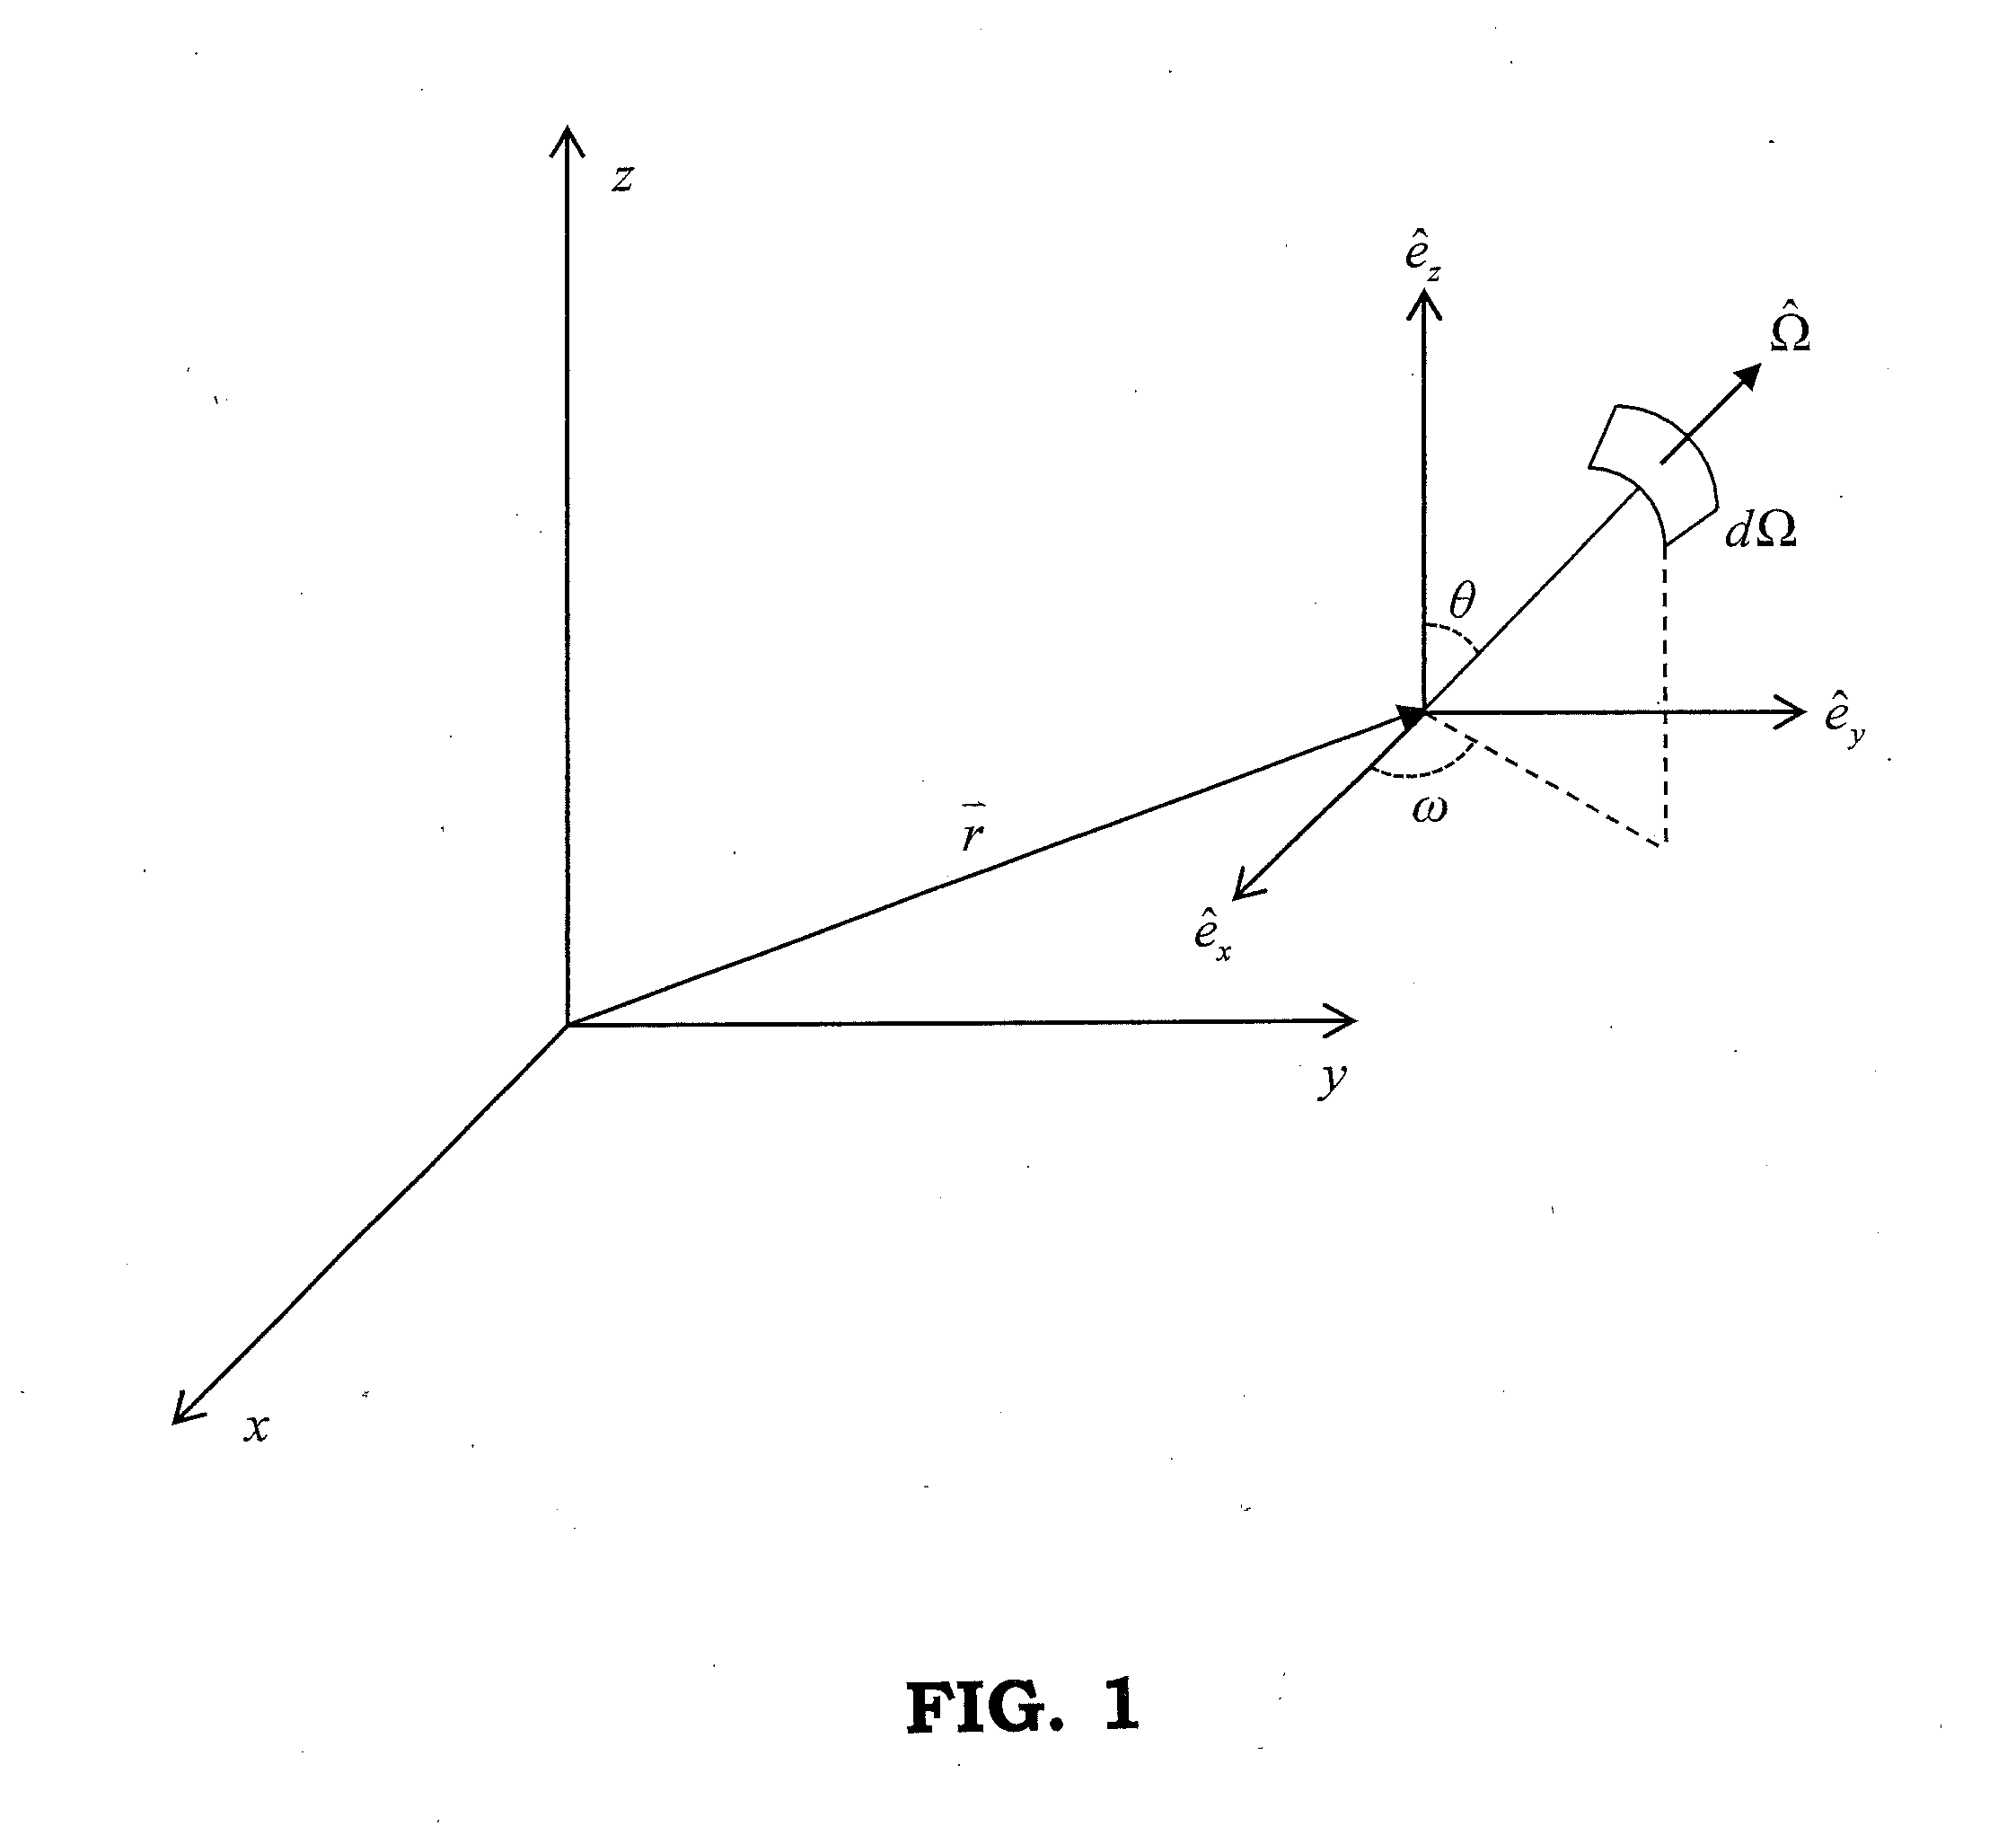 Methods, systems, and computer program products for generating fast neutron spectra